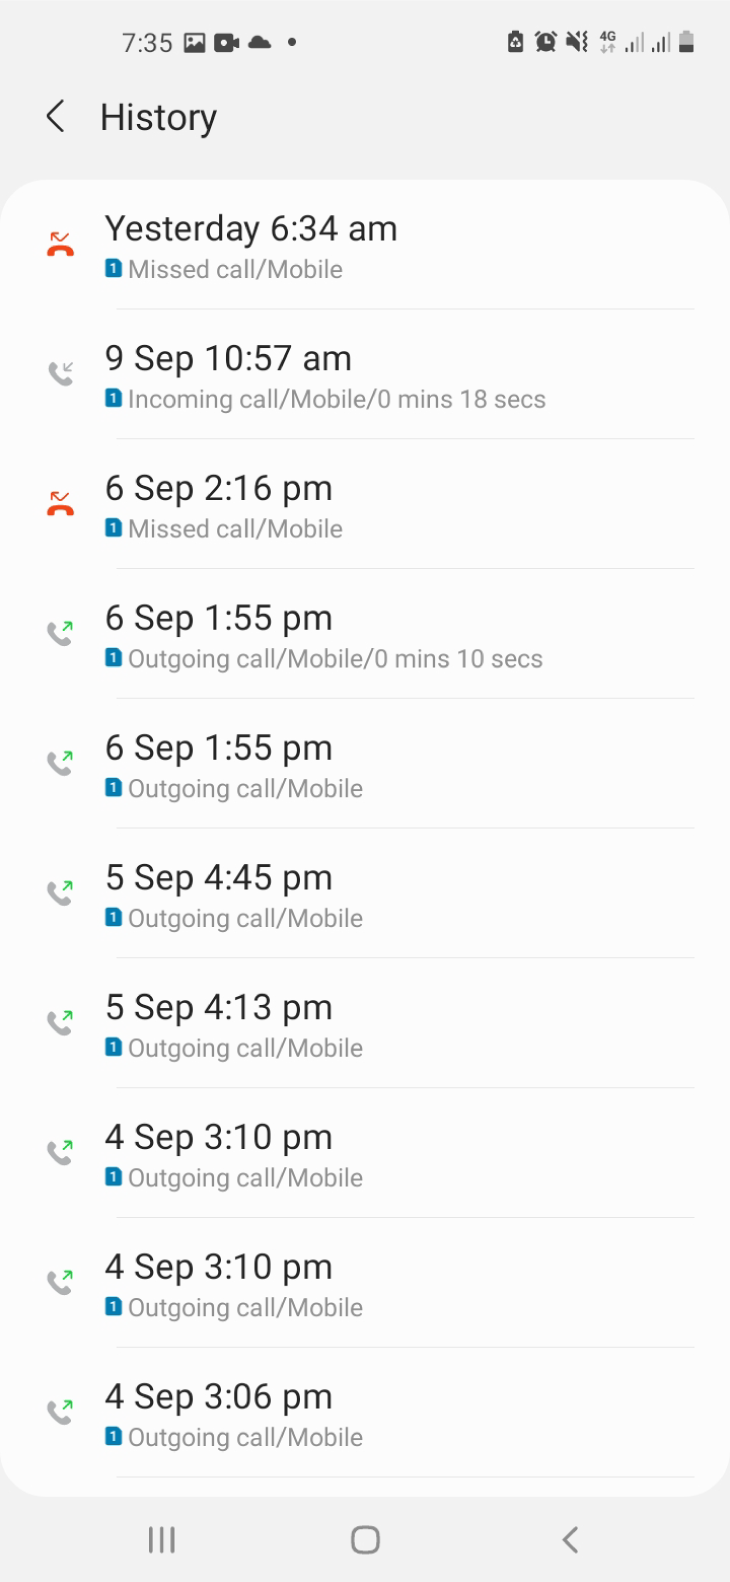 Call history for a specific contact in the Contacts app.